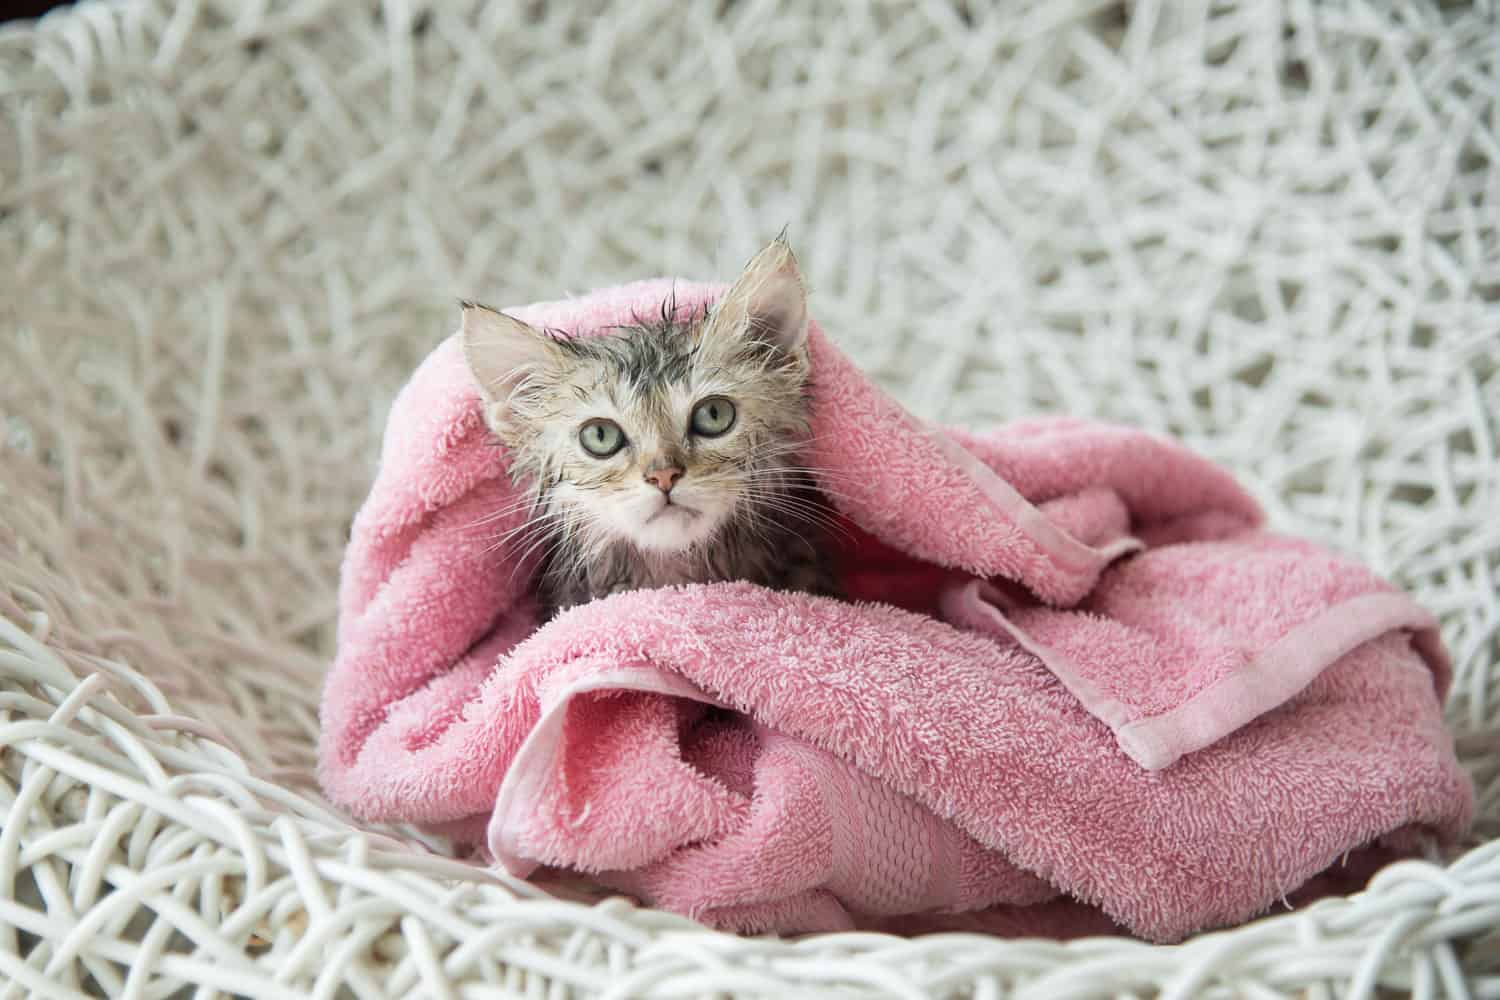 A newly bathed kitten wrapped in pink cloth